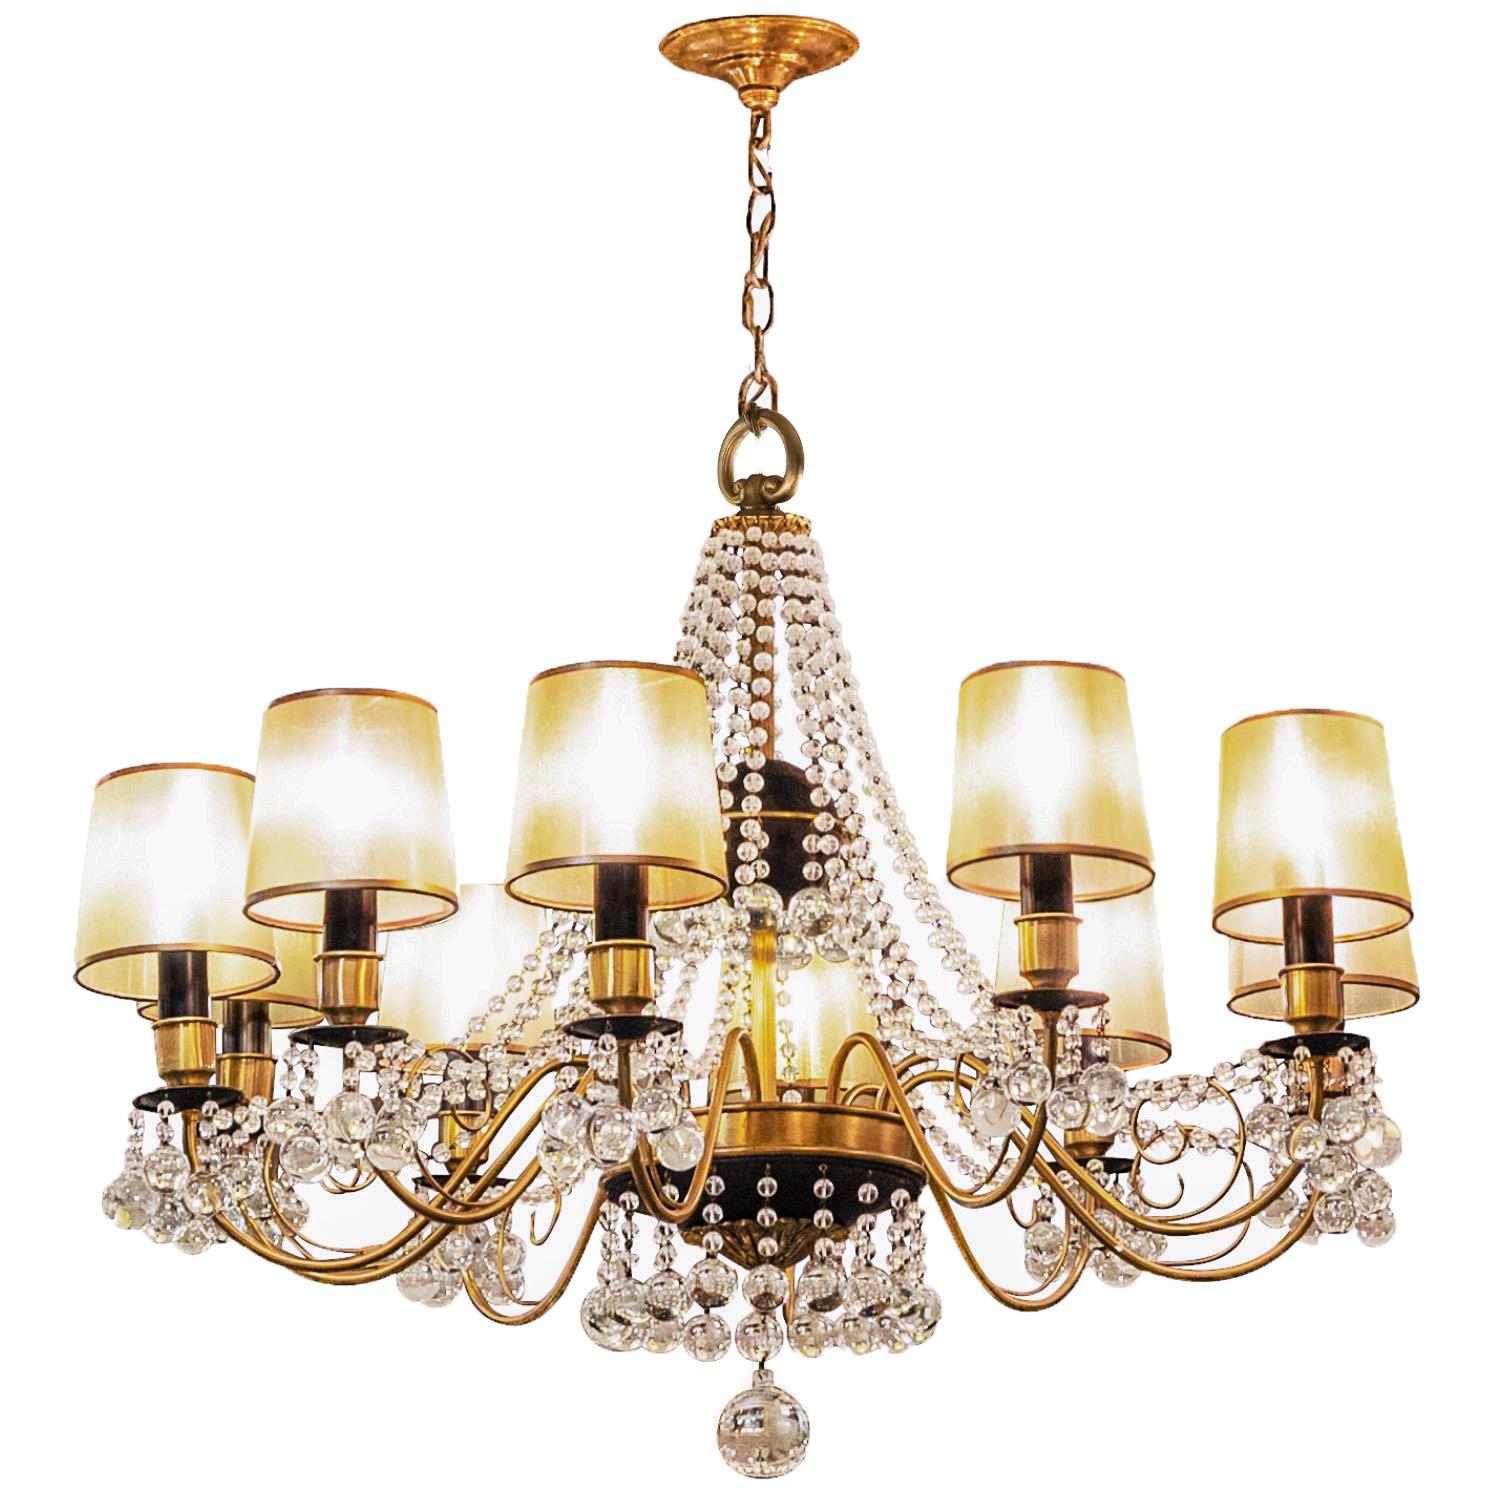 Magnificent ten arm chandelier in brass and black enamel with extensive decoration with strings of  crystals attributed to Tommi Parzinger, American 1950's.  This came from a home on Long Island that was decorated by Tommi Parzinger. This chandelier